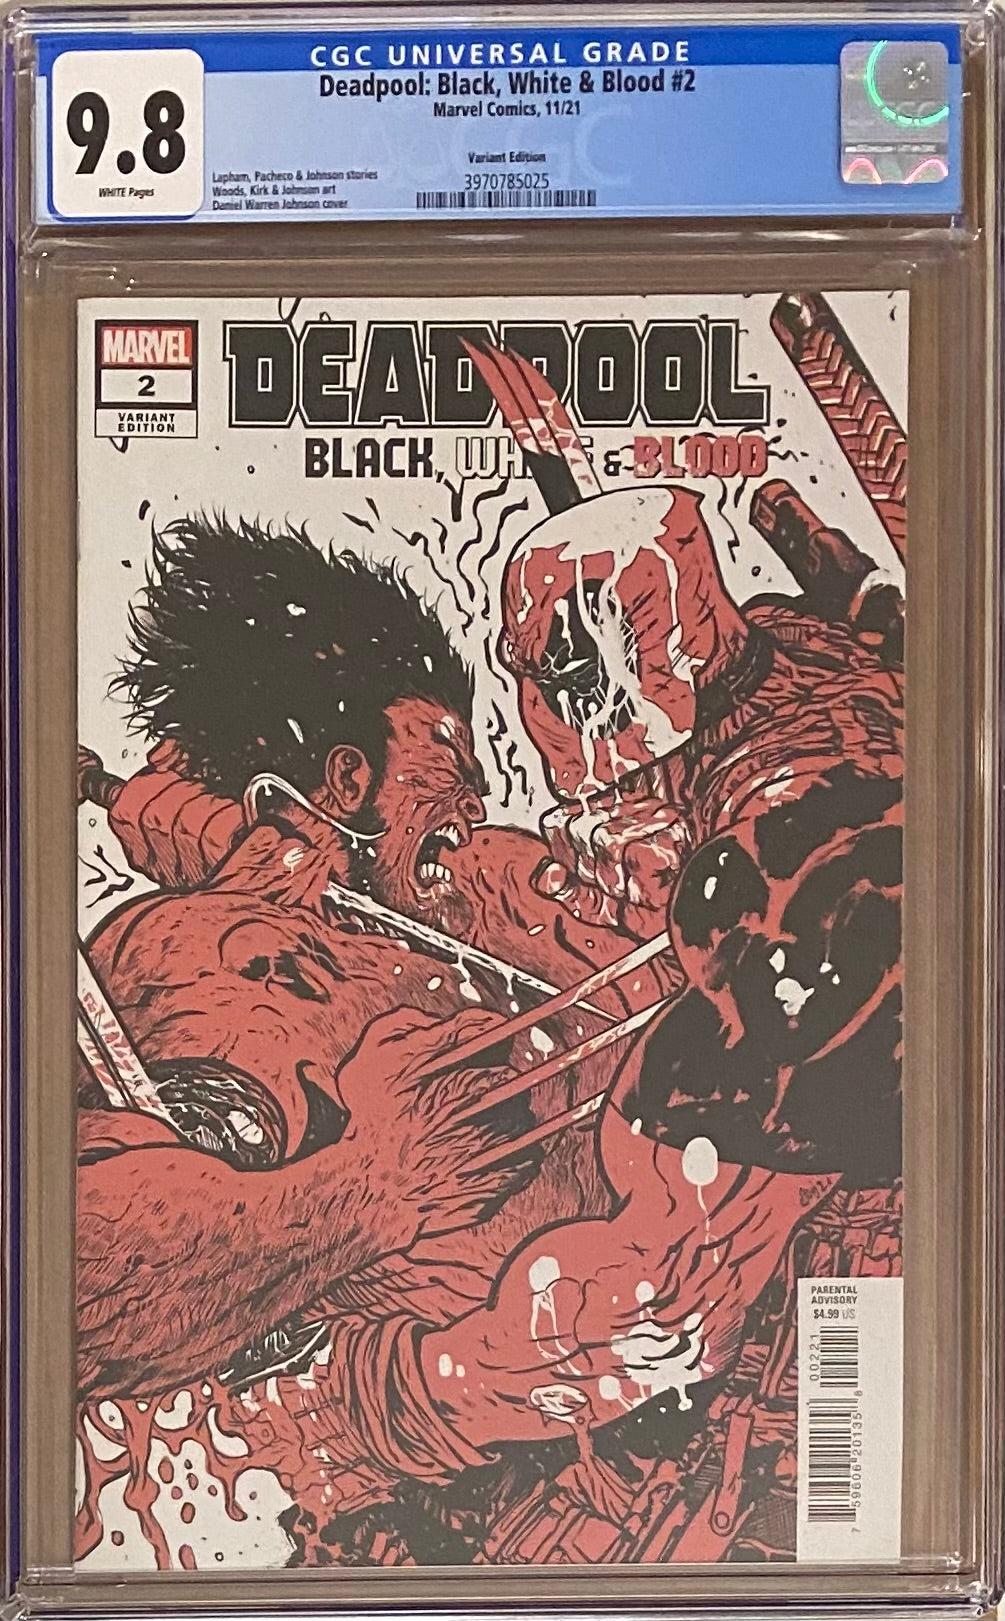 Deadpool: Black, White, and Blood #2 Variant CGC 9.8